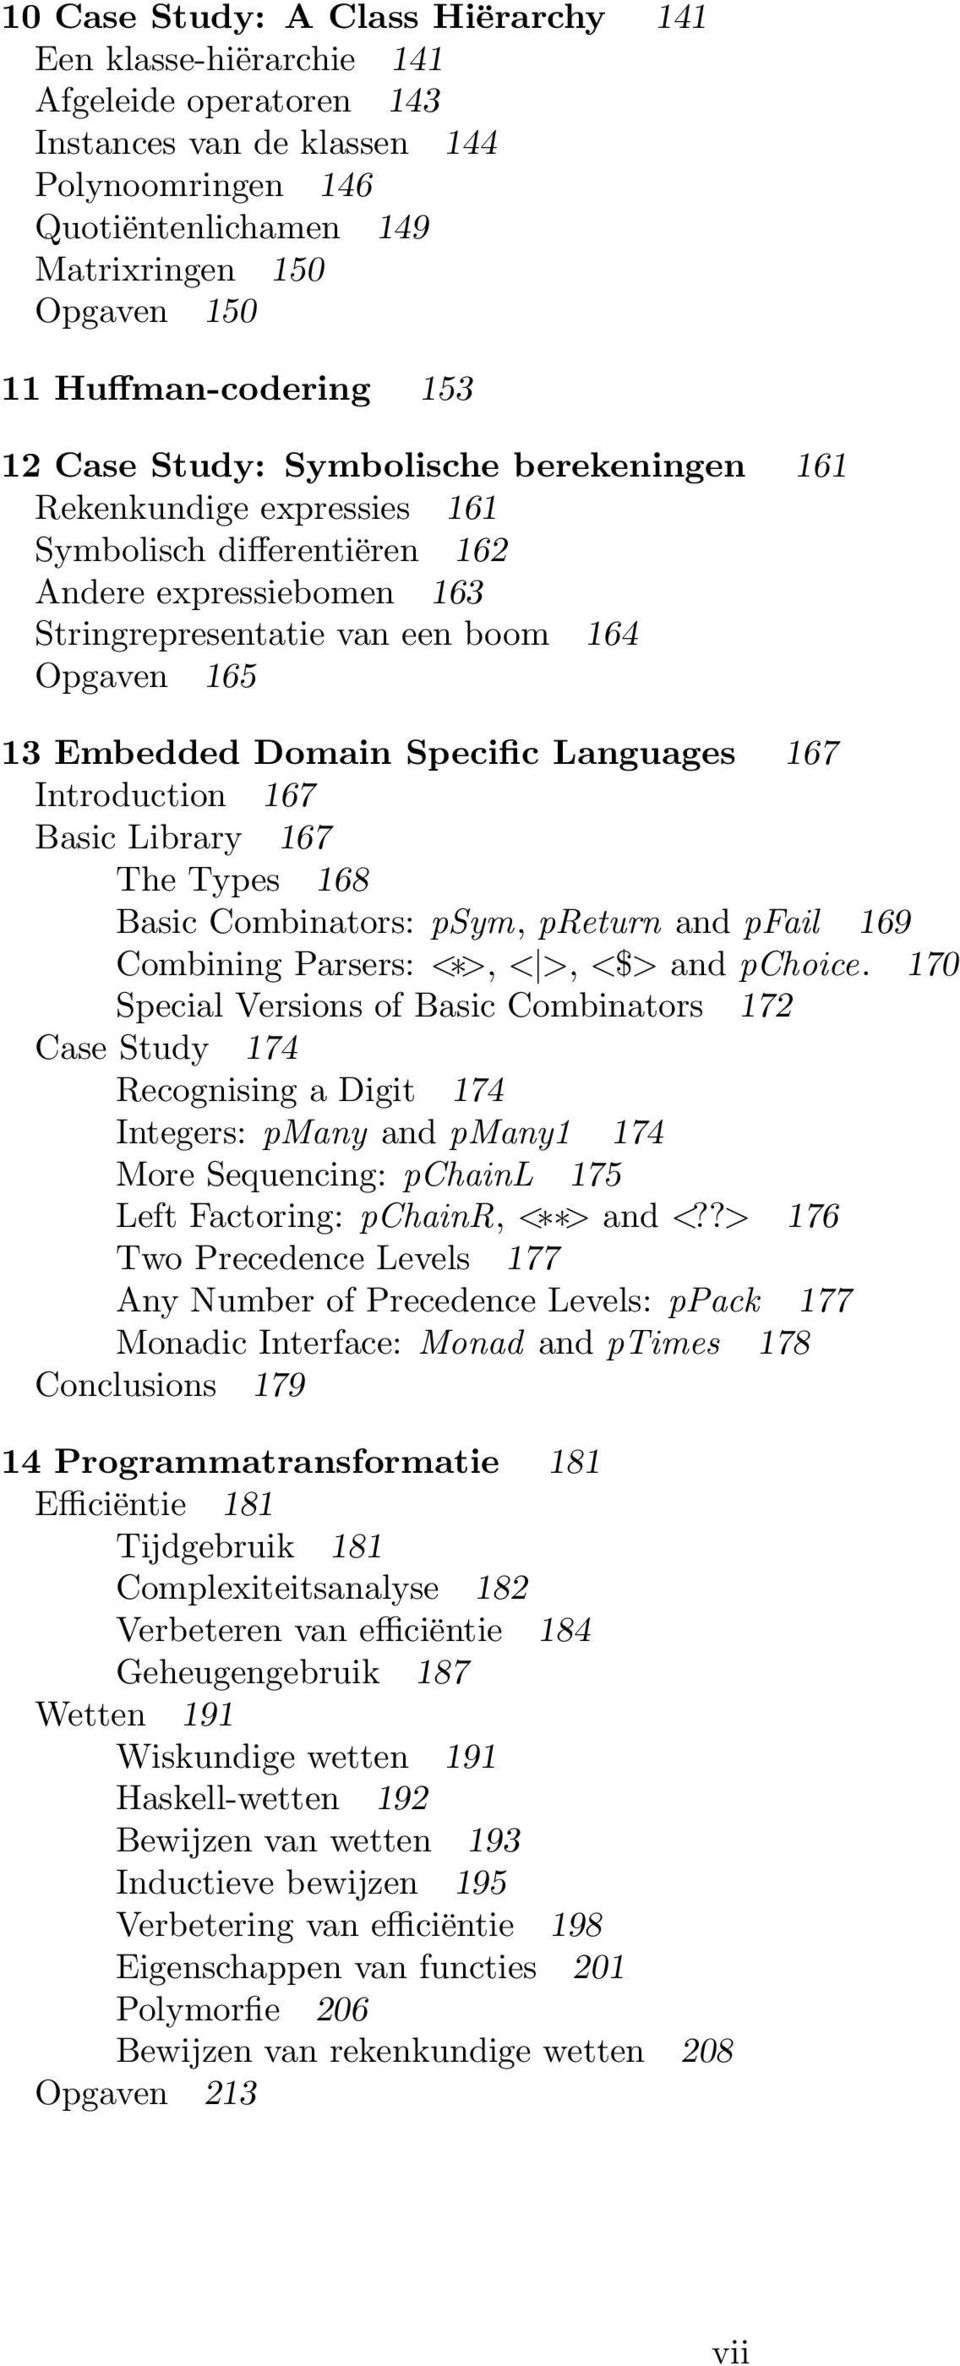 13 Embedded Domain Specific Languages 167 Introduction 167 Basic Library 167 The Types 168 Basic Combinators: psym, preturn and pfail 169 Combining Parsers: < >, < >, <$> and pchoice.